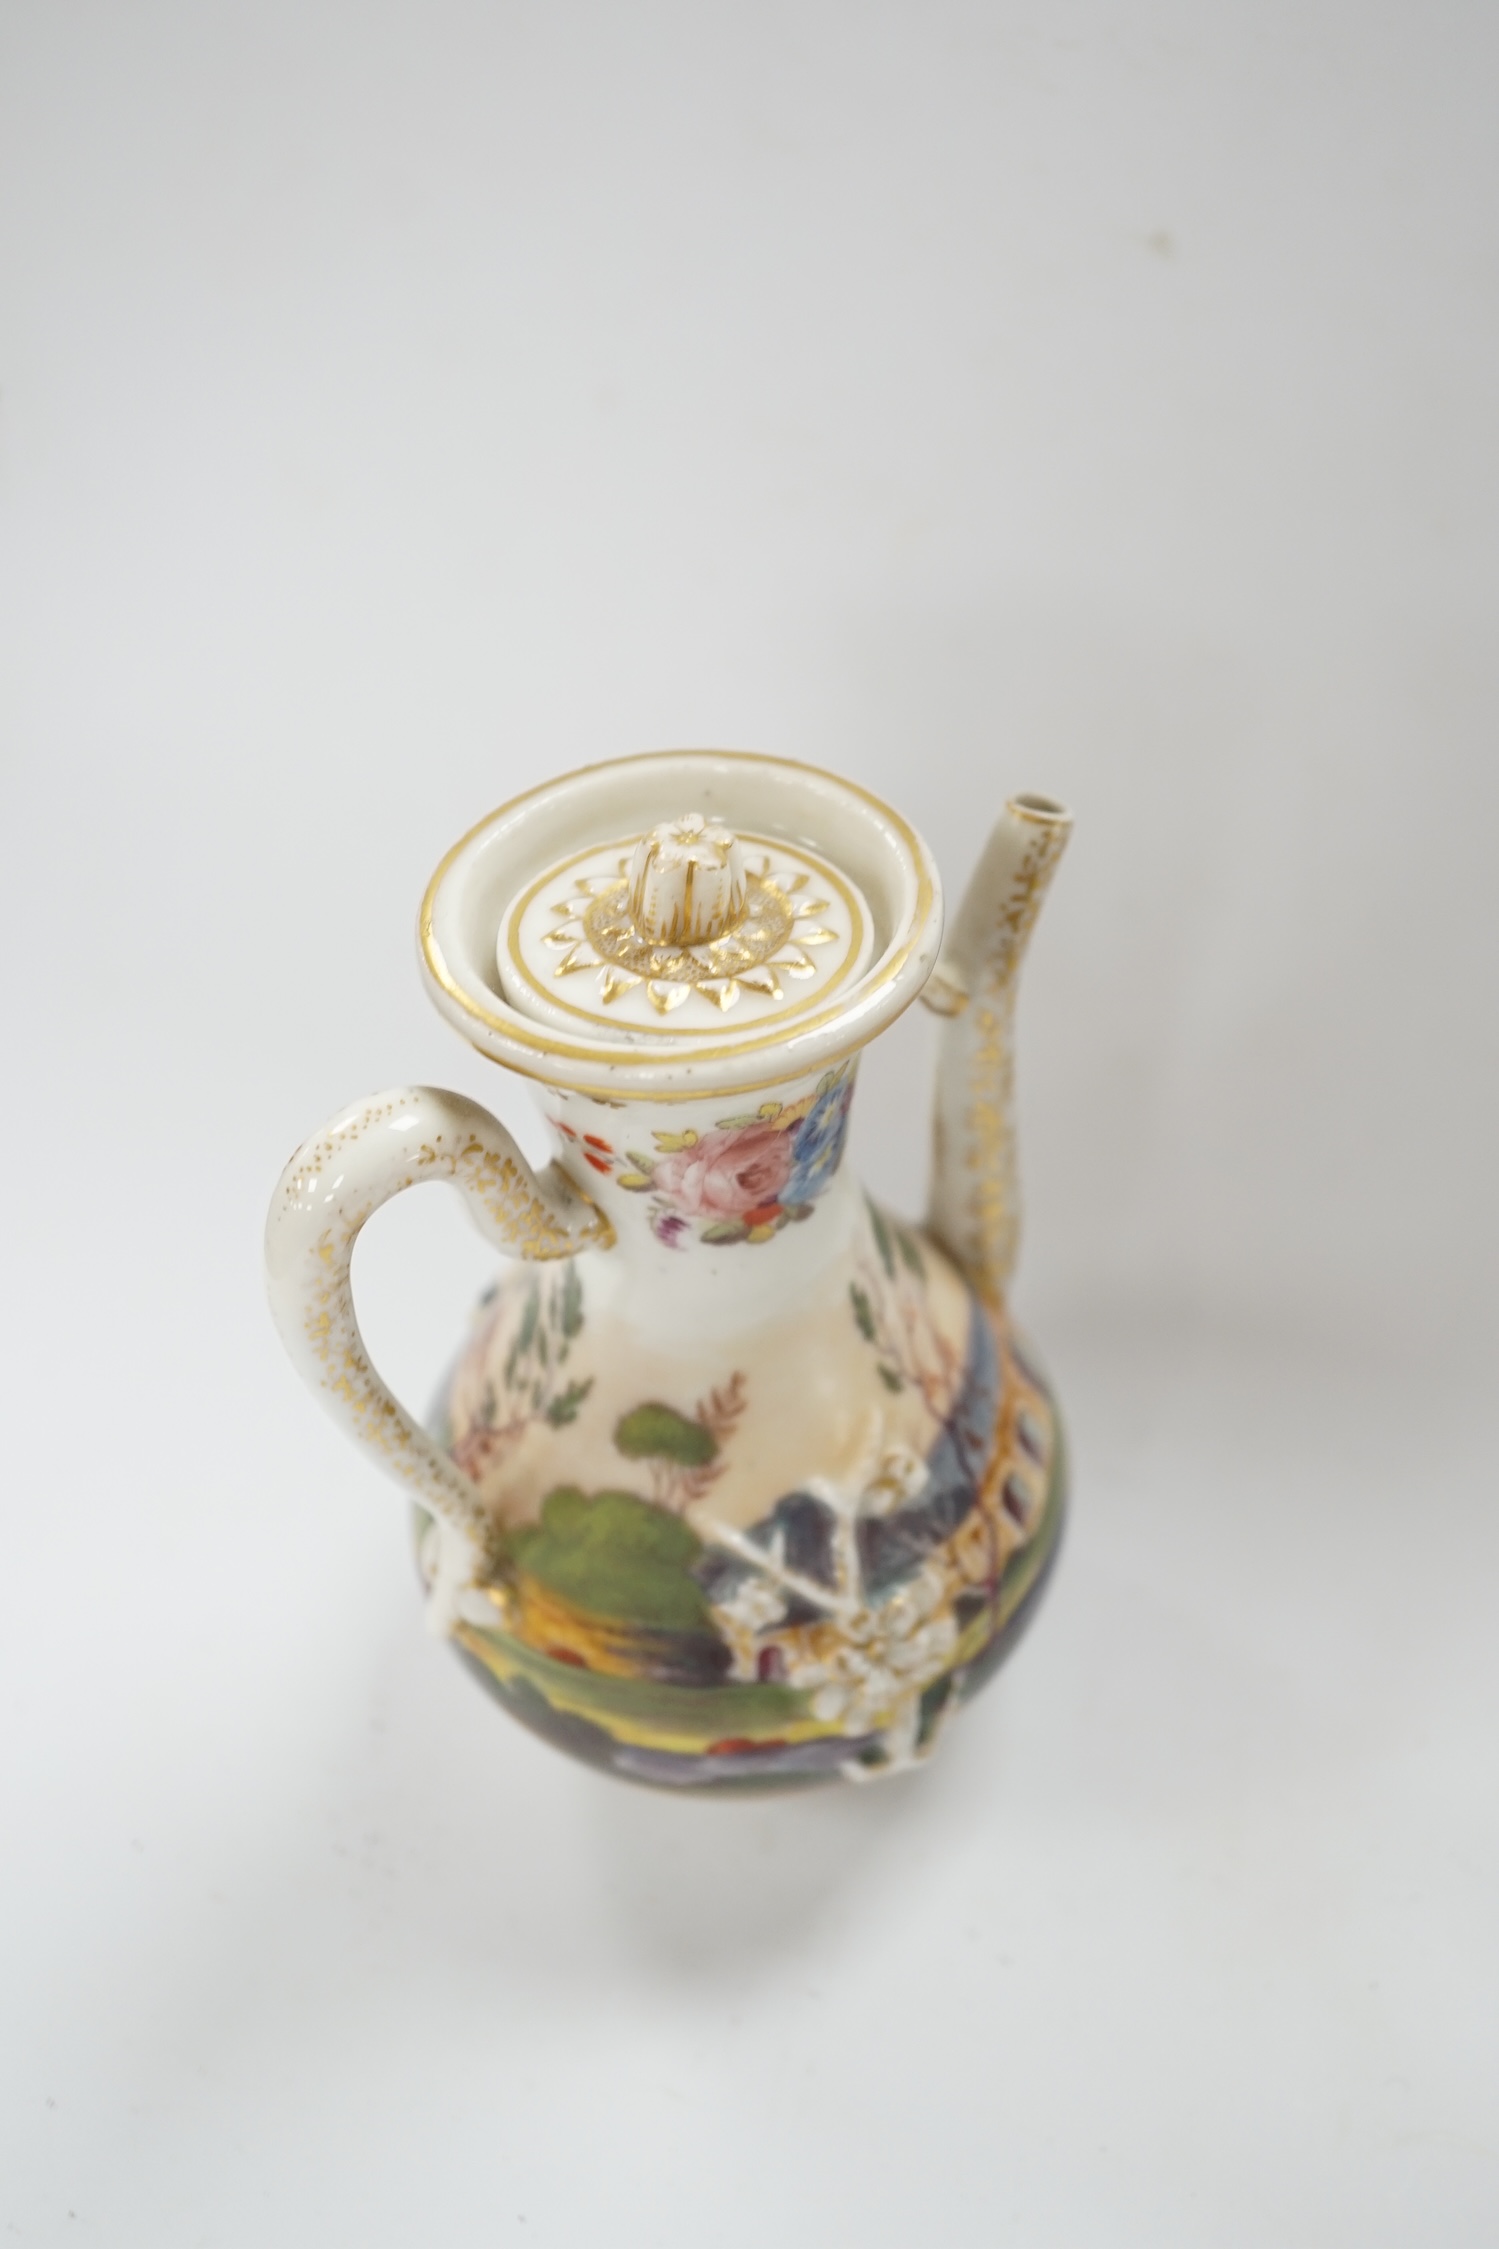 A 19th century Paris porcelain ewer and cover, hand painted with a riverscape and cattle, 13cm high. Condition - fair